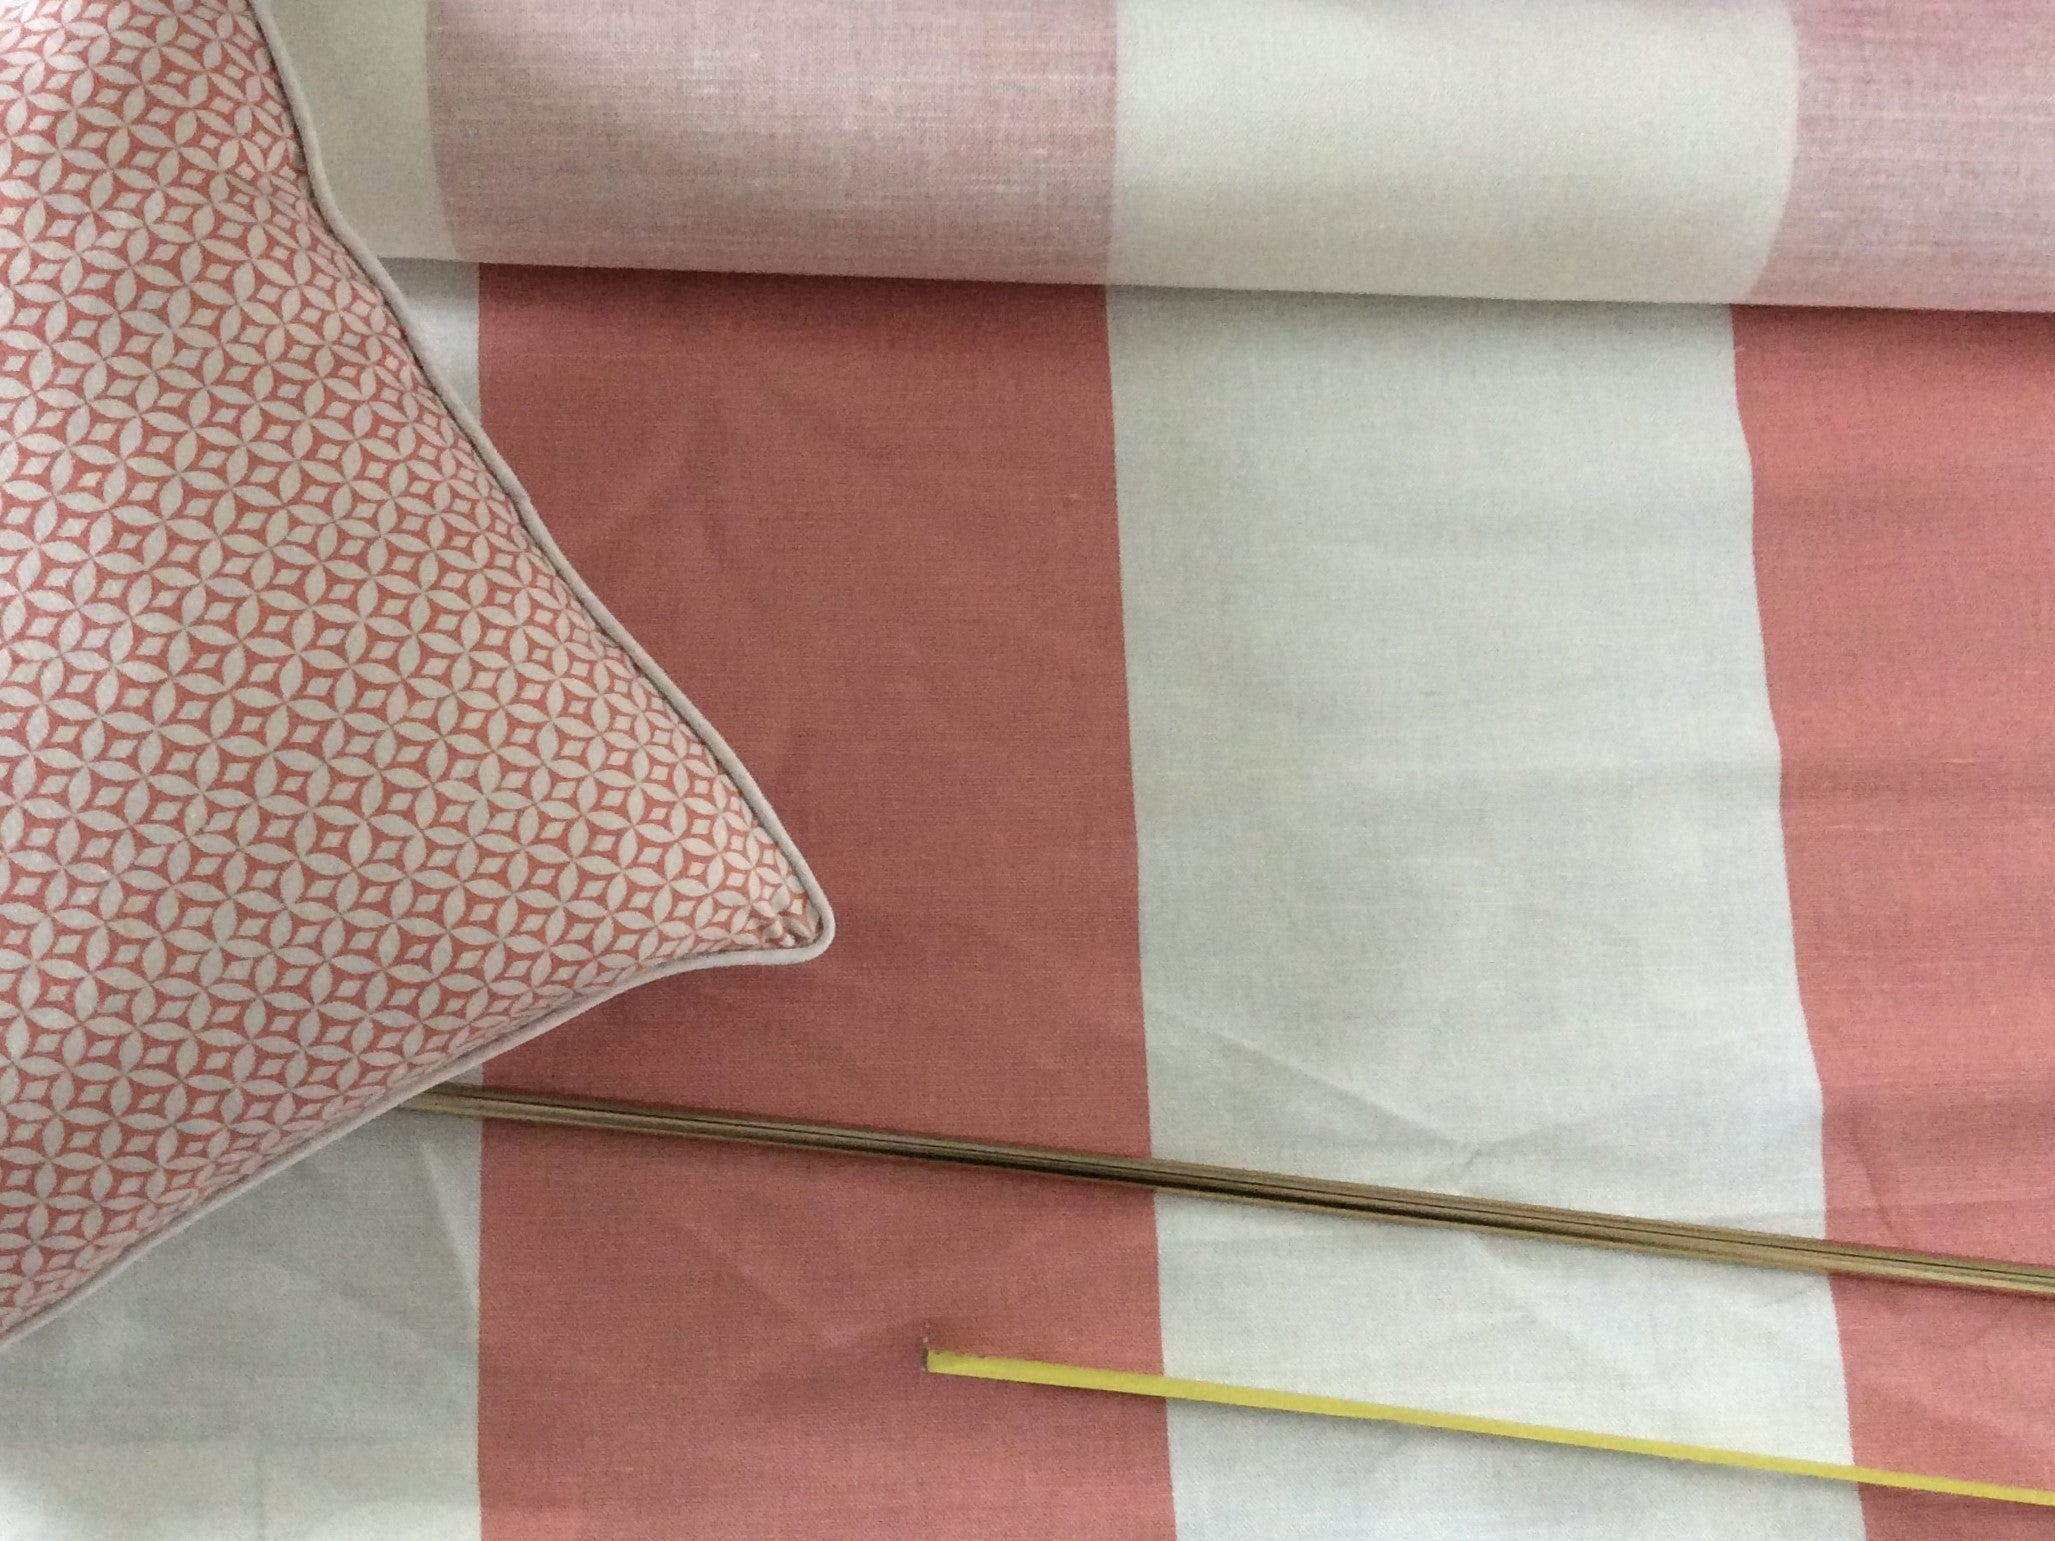 How to Make a Fabric Bed Canopy